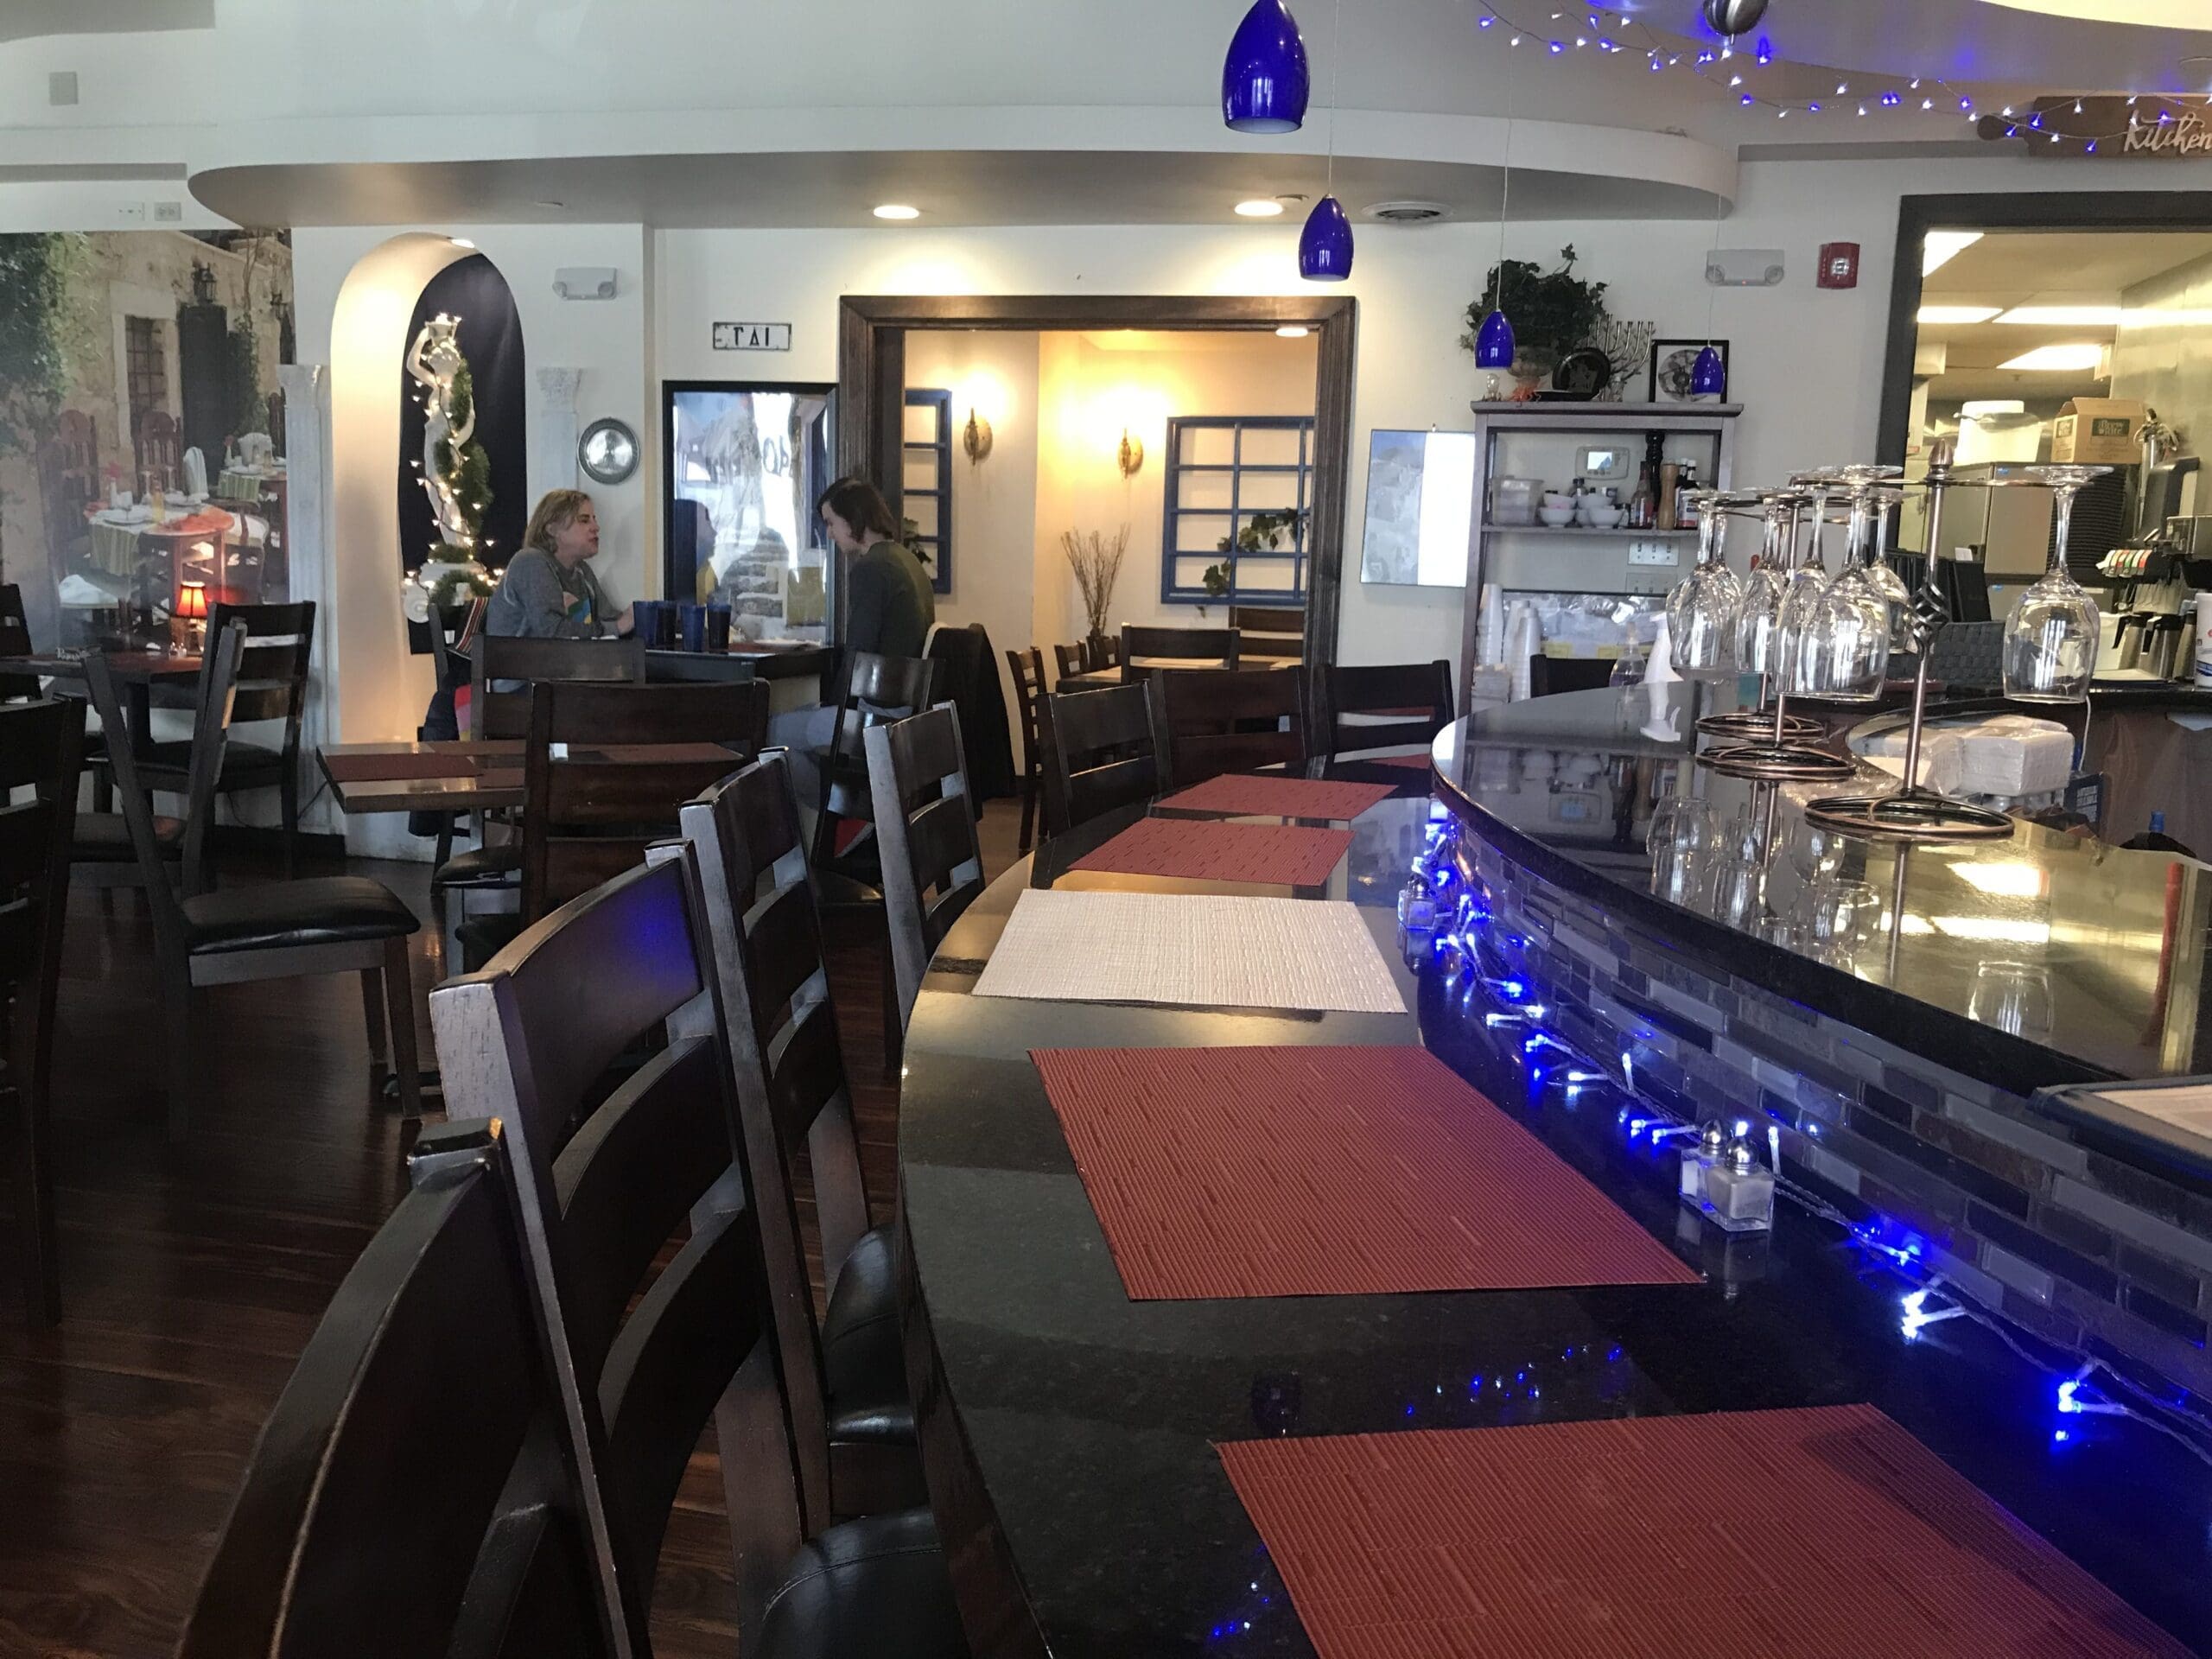 Greek Kitchen in Kirkwood, MO Closes Forever